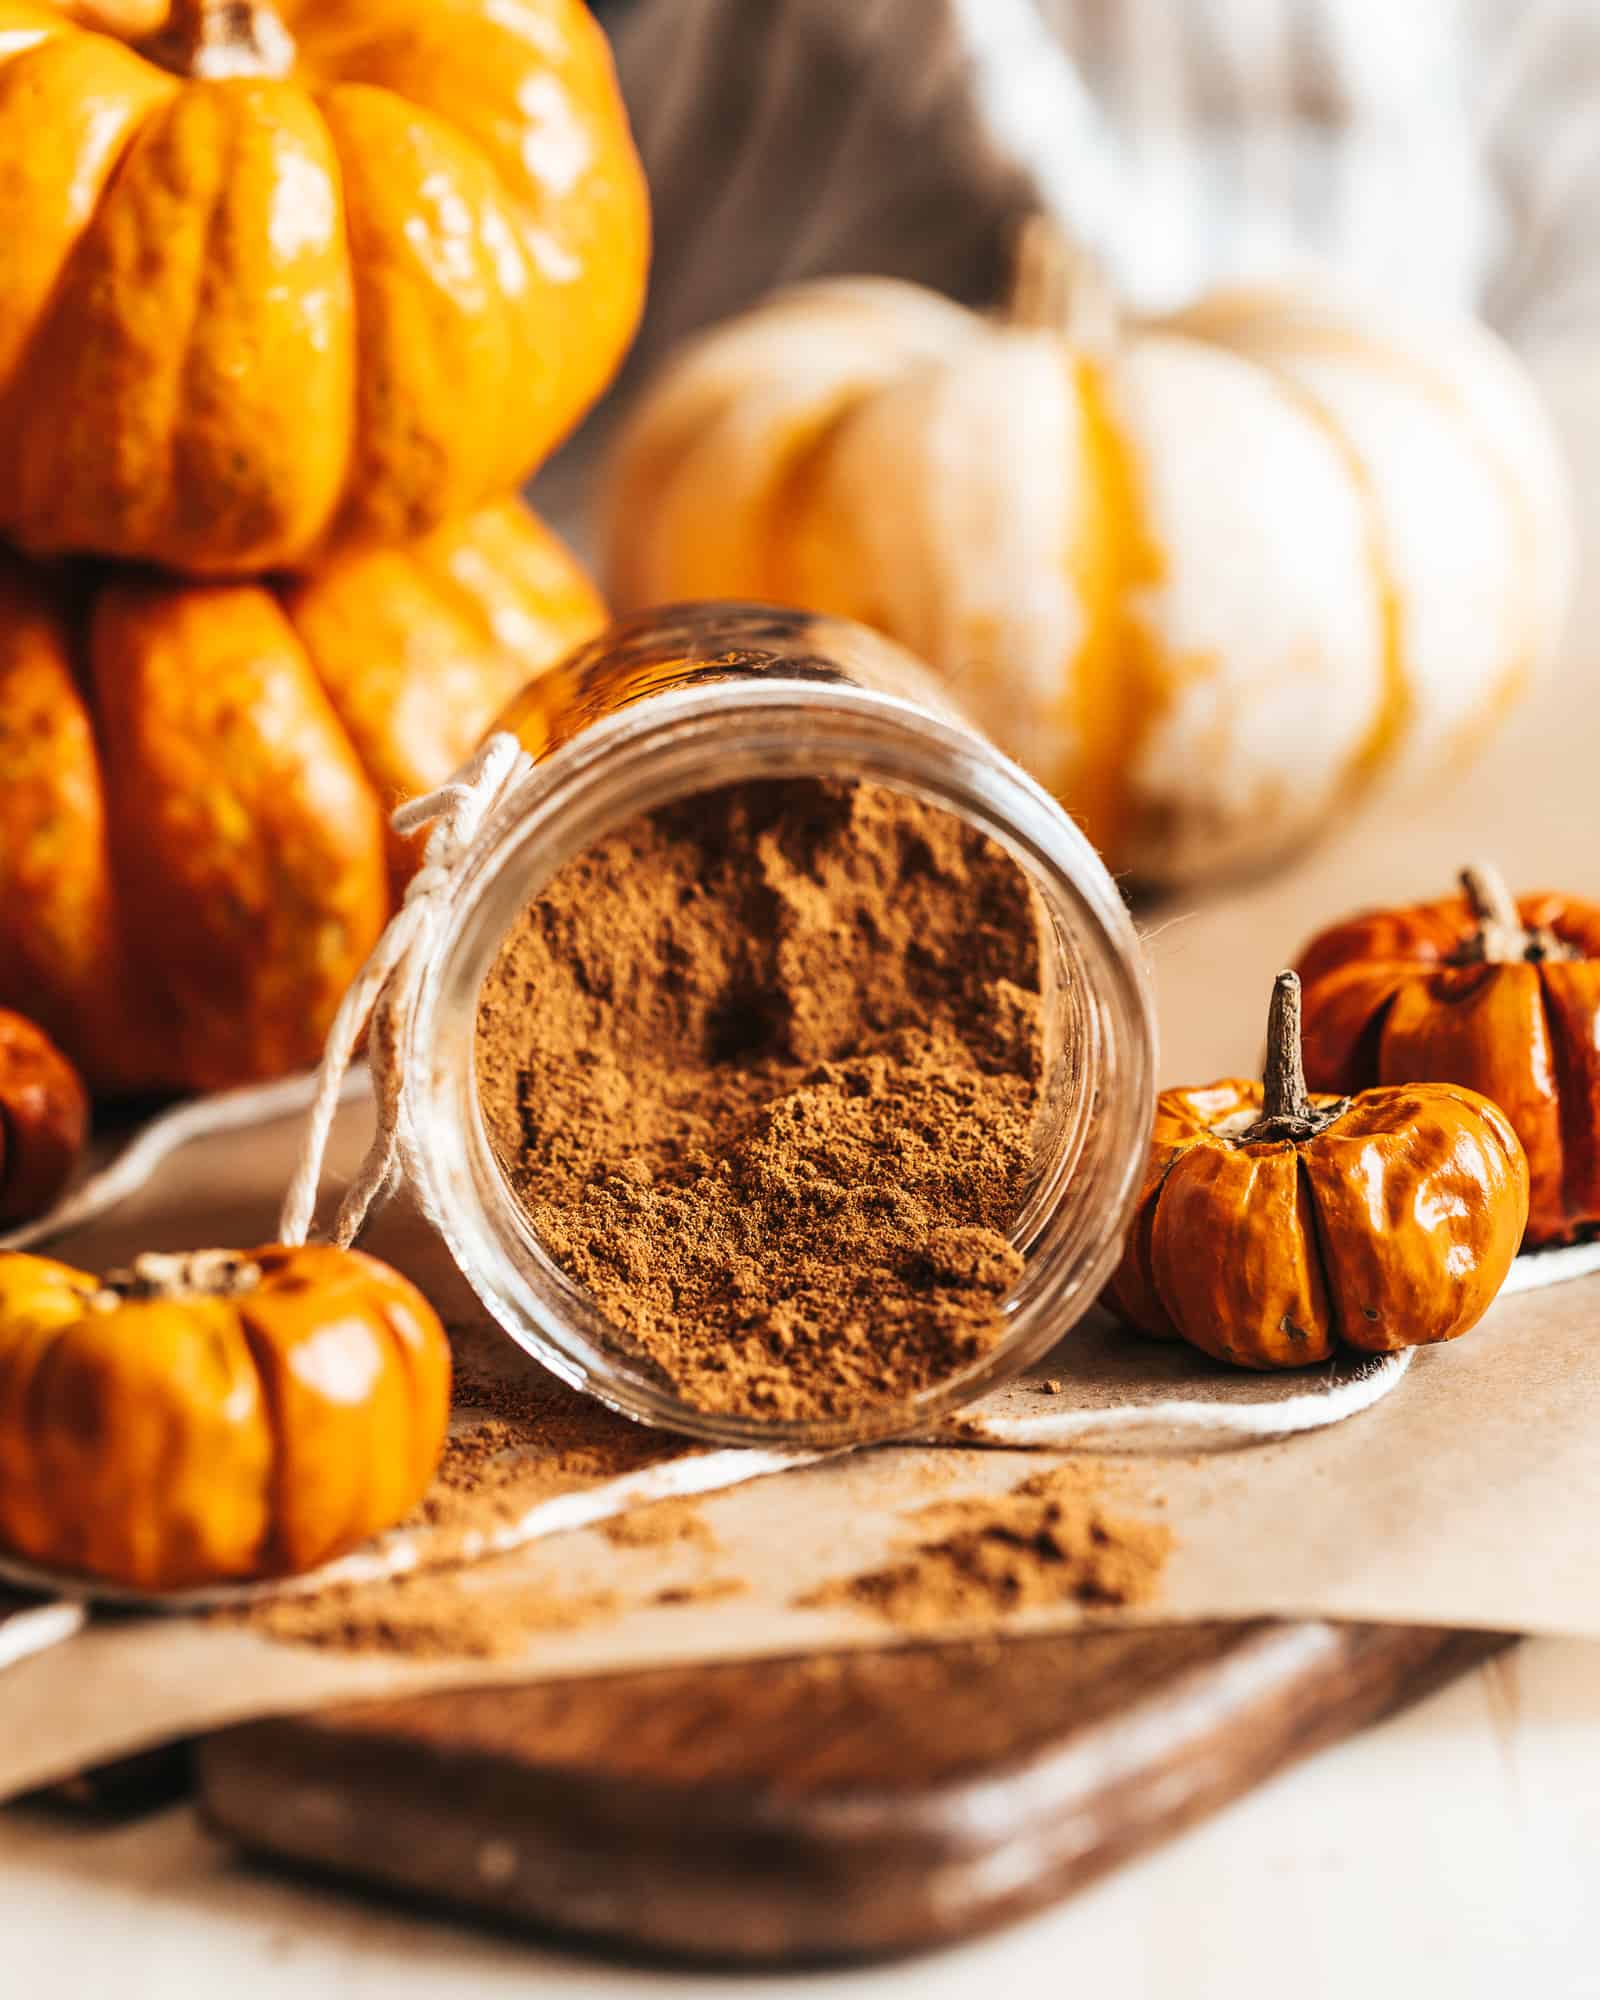 An open jar of Homemade Pumpkin Spice with some seasoning spilled on the table with an assortment of pumpkins in the background.